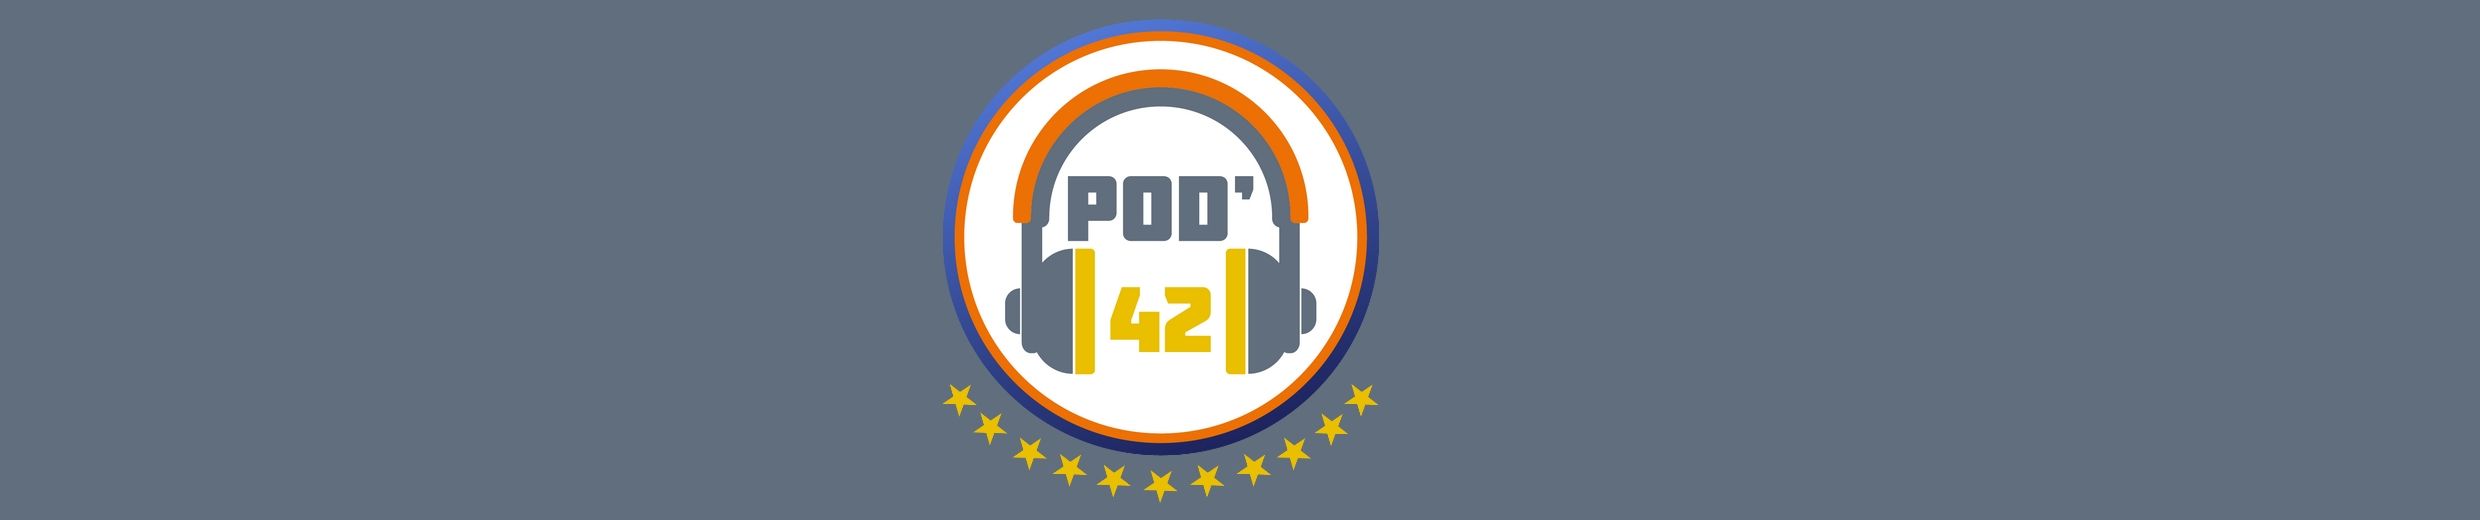 Stream episode Pod'42 - n°10 (10/02/20) avec Amanda Ngandu-Ntumba by Pod'42  by Parlons Sports podcast | Listen online for free on SoundCloud